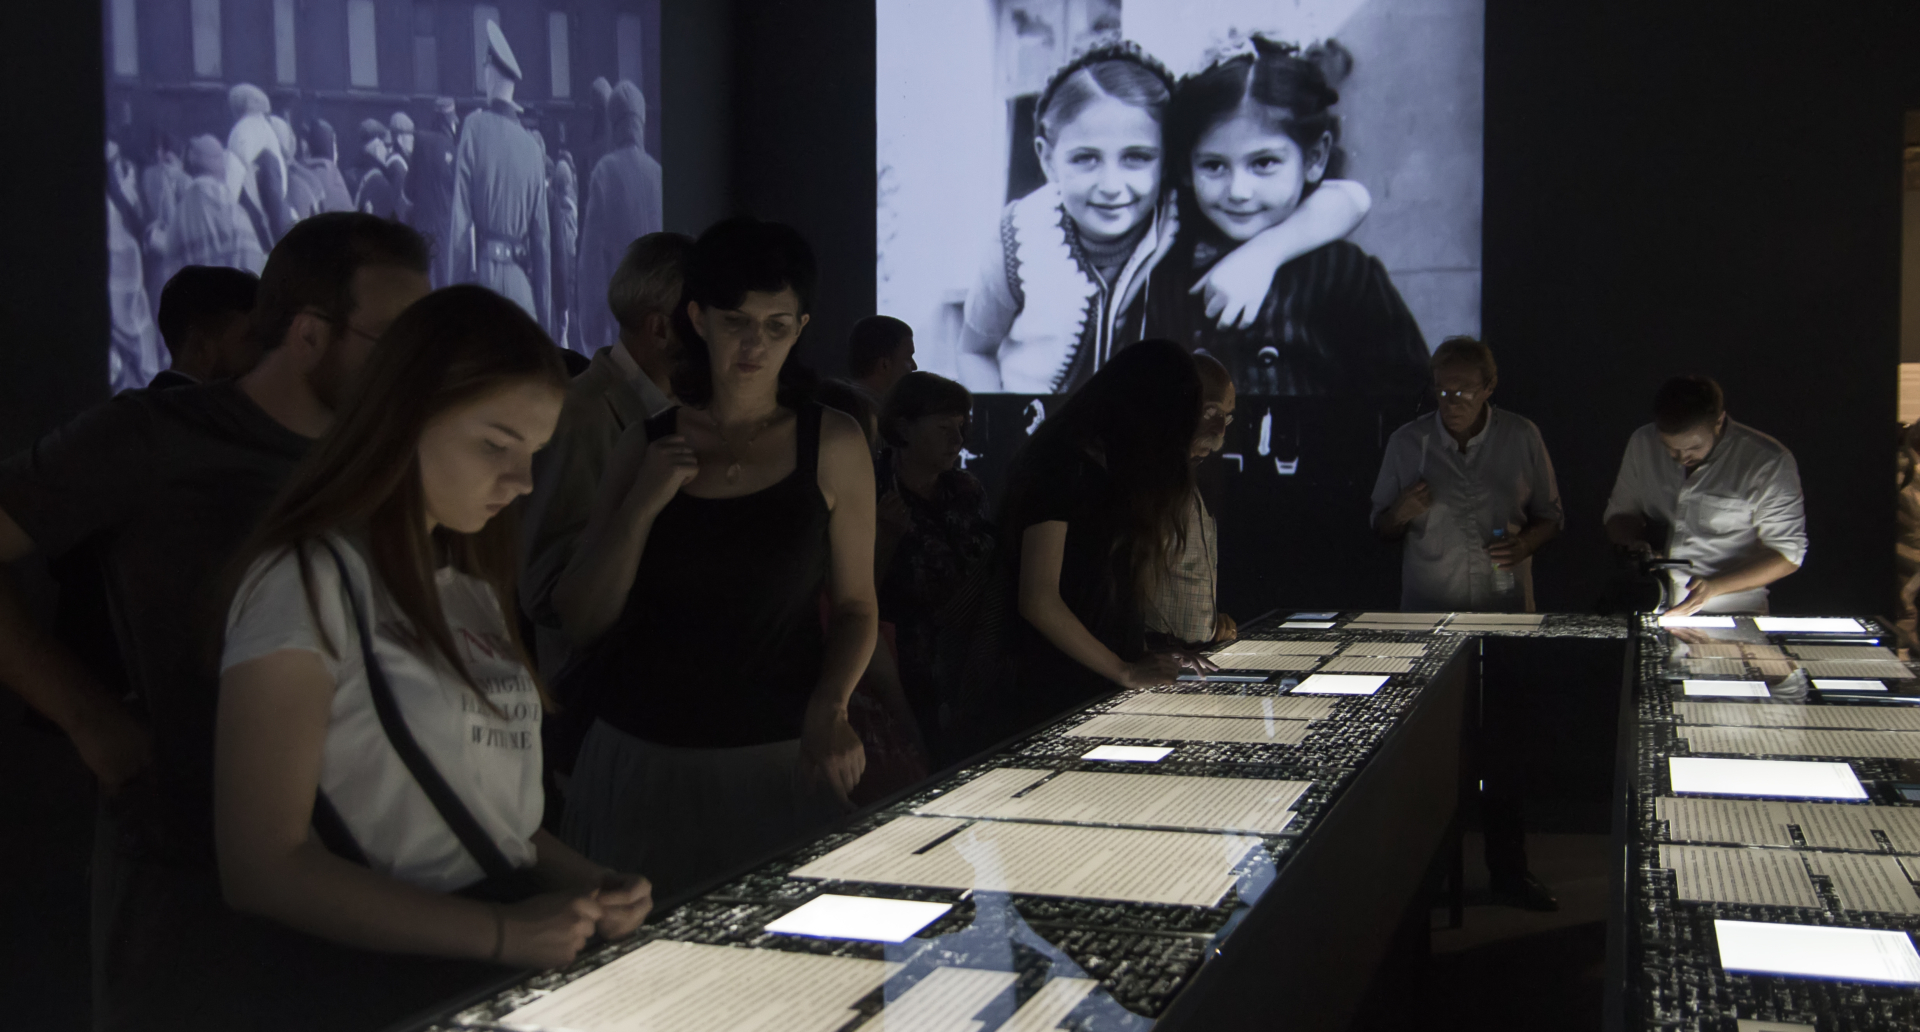 1444Blending Holocaust testimony with music and technology